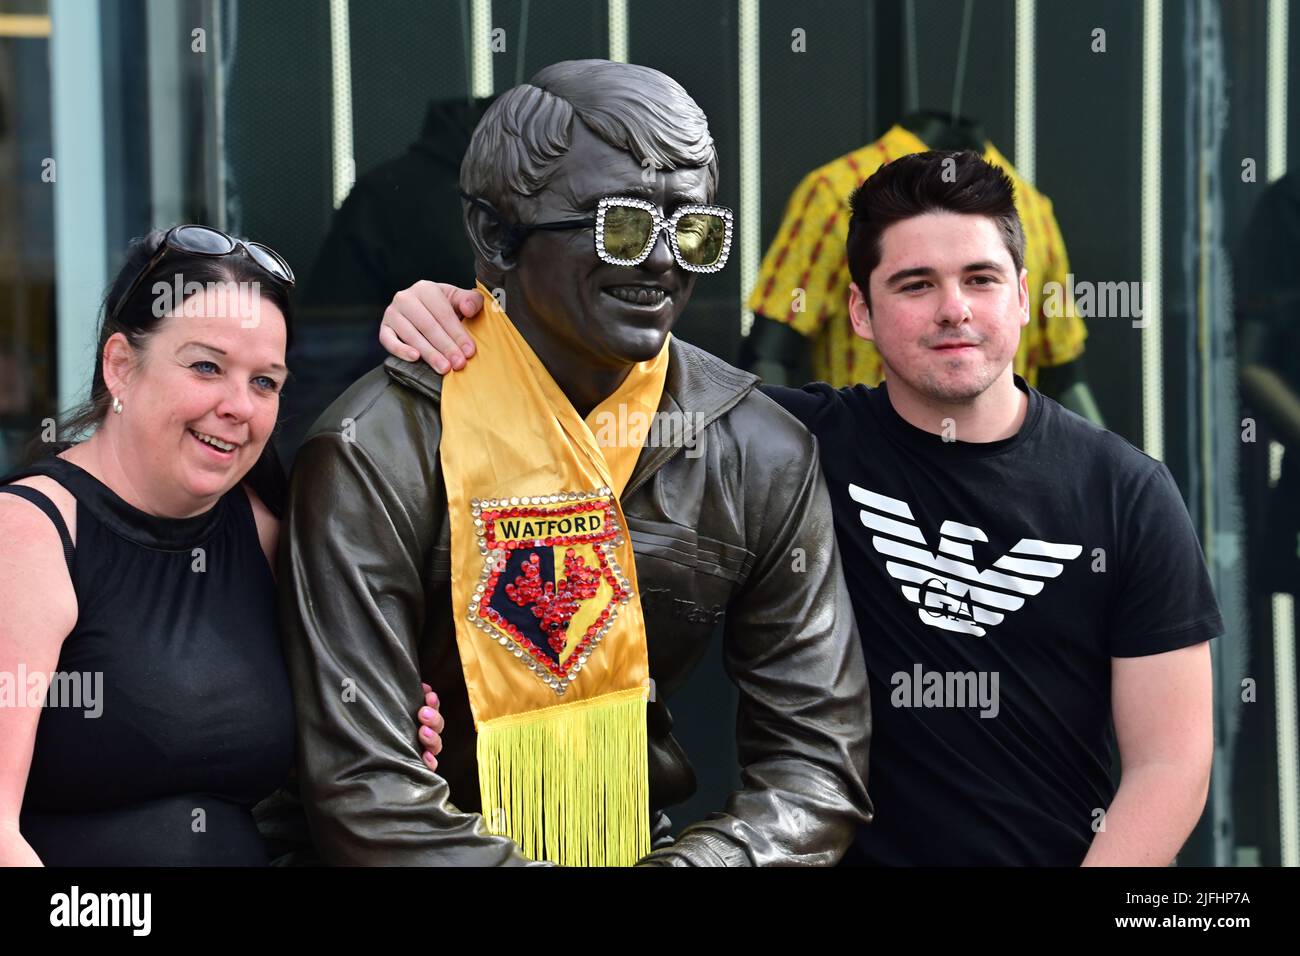 Fans pose with Graham Taylor Statue with Watford FC scarf Stock Photo